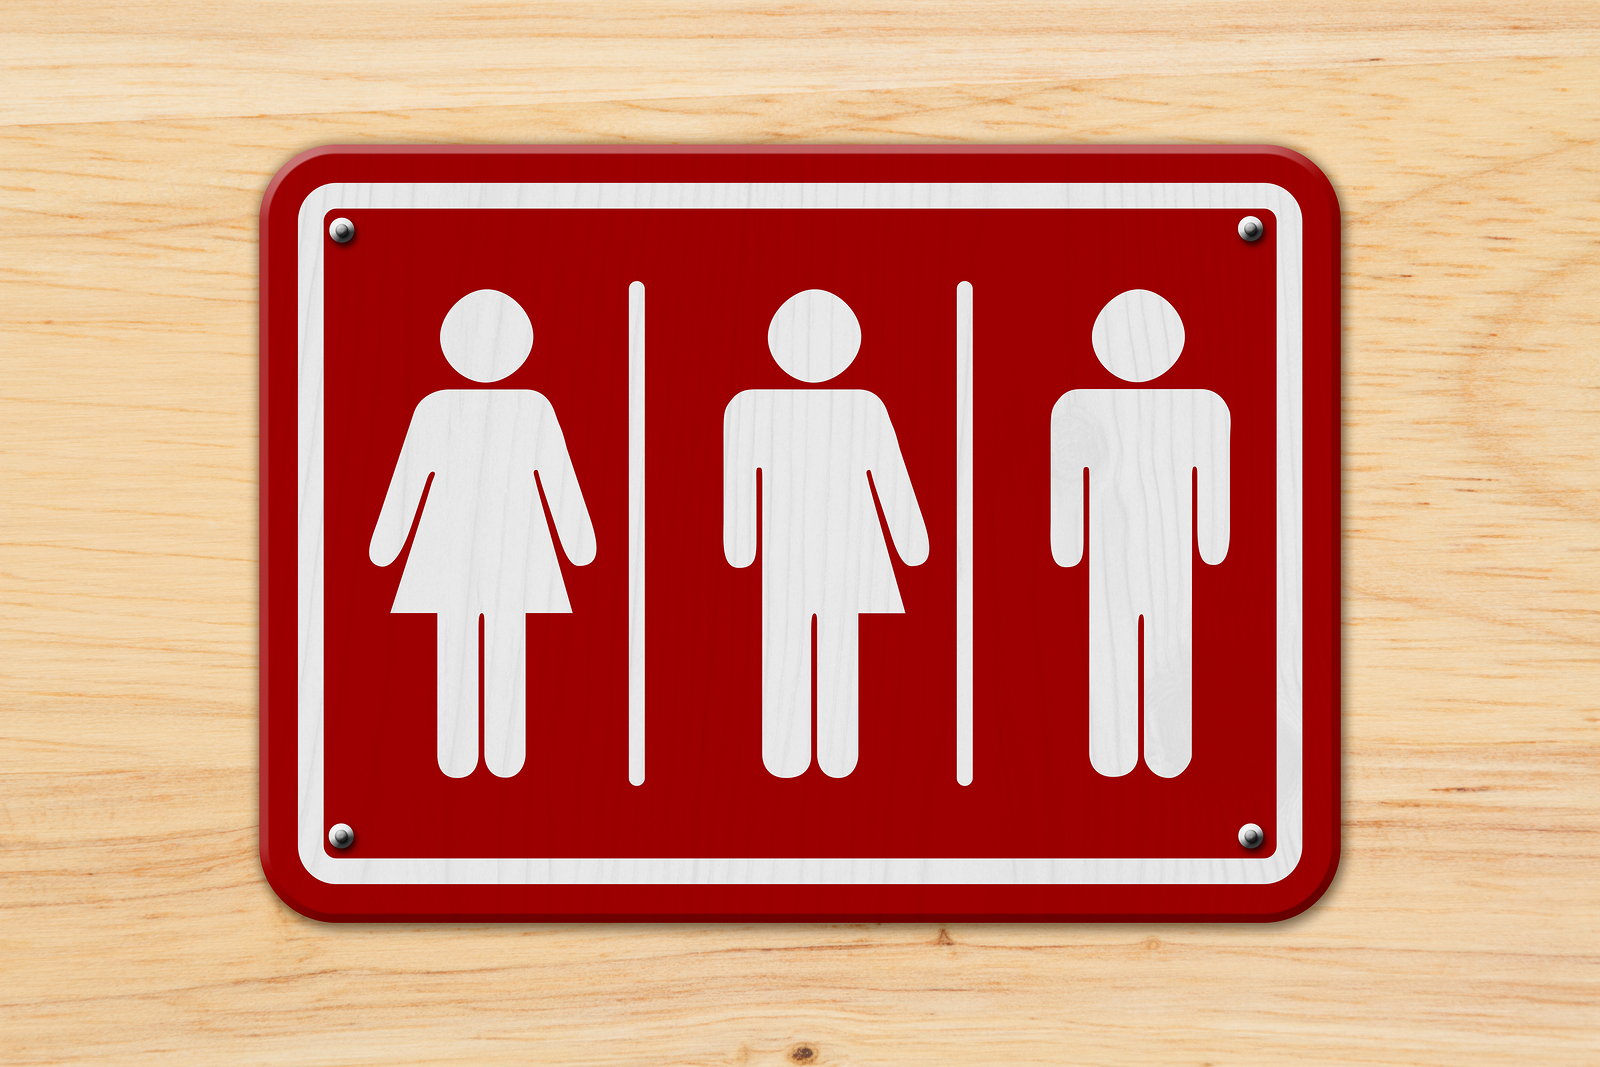 Transgenderism All inclusive transgender sign Red and white sign with a woman a transgender and man symbol on wood 3D Illustration